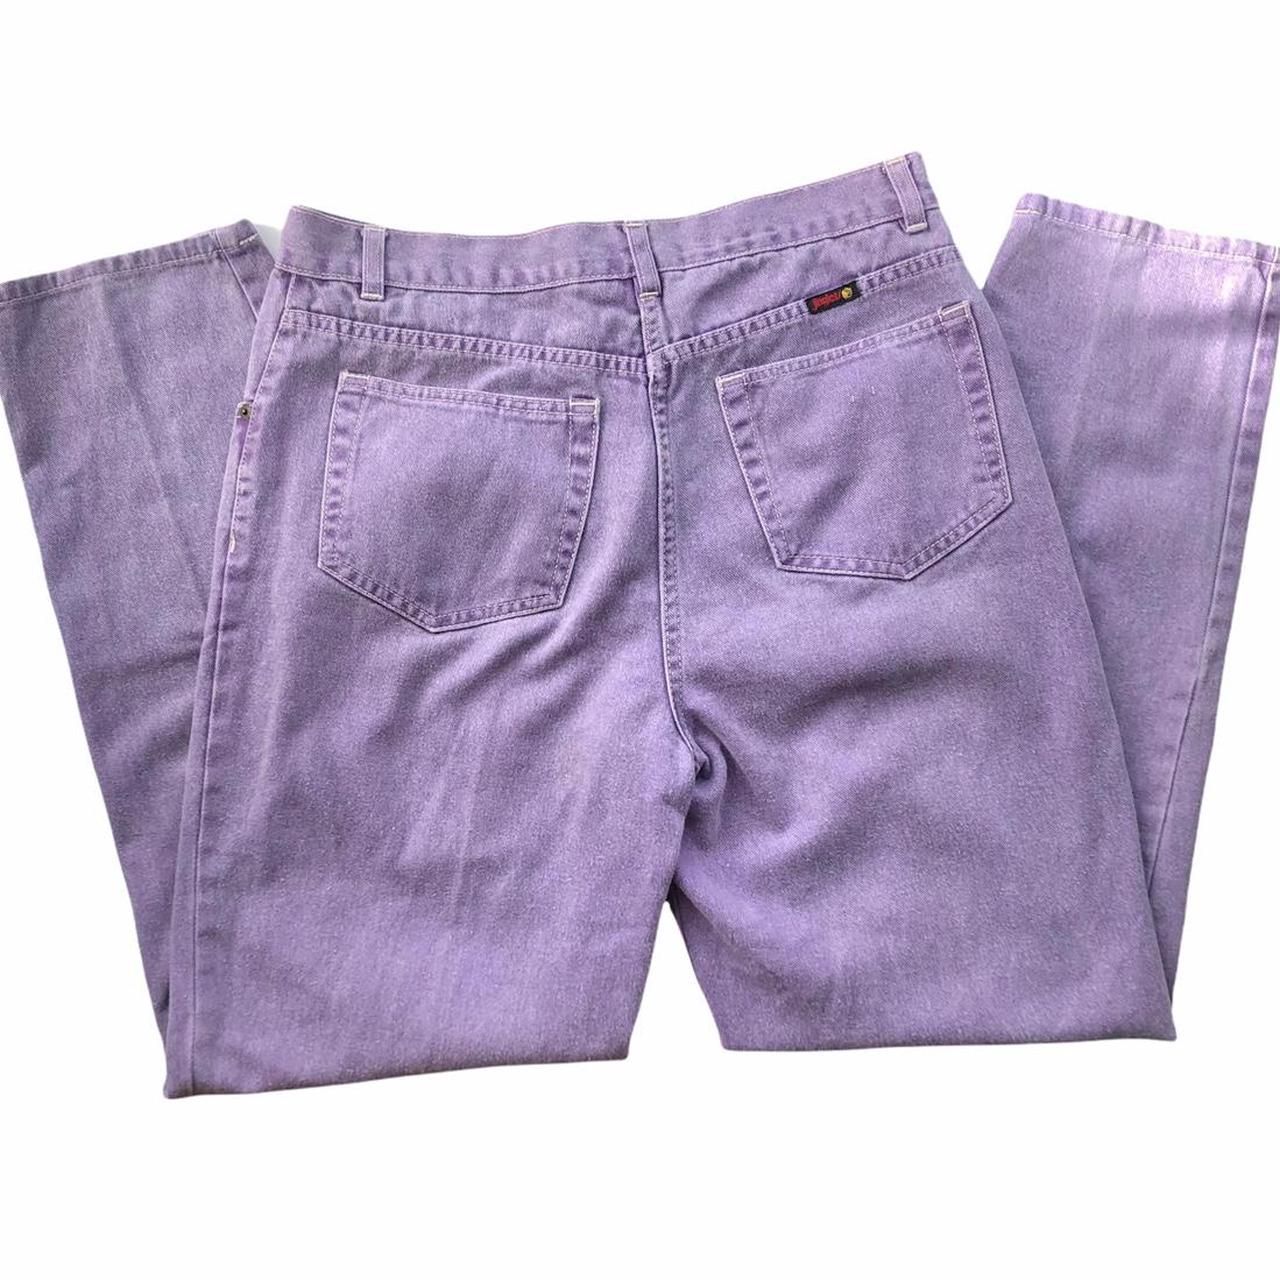 Product Image 3 - Vintage jeans in purple lilac,